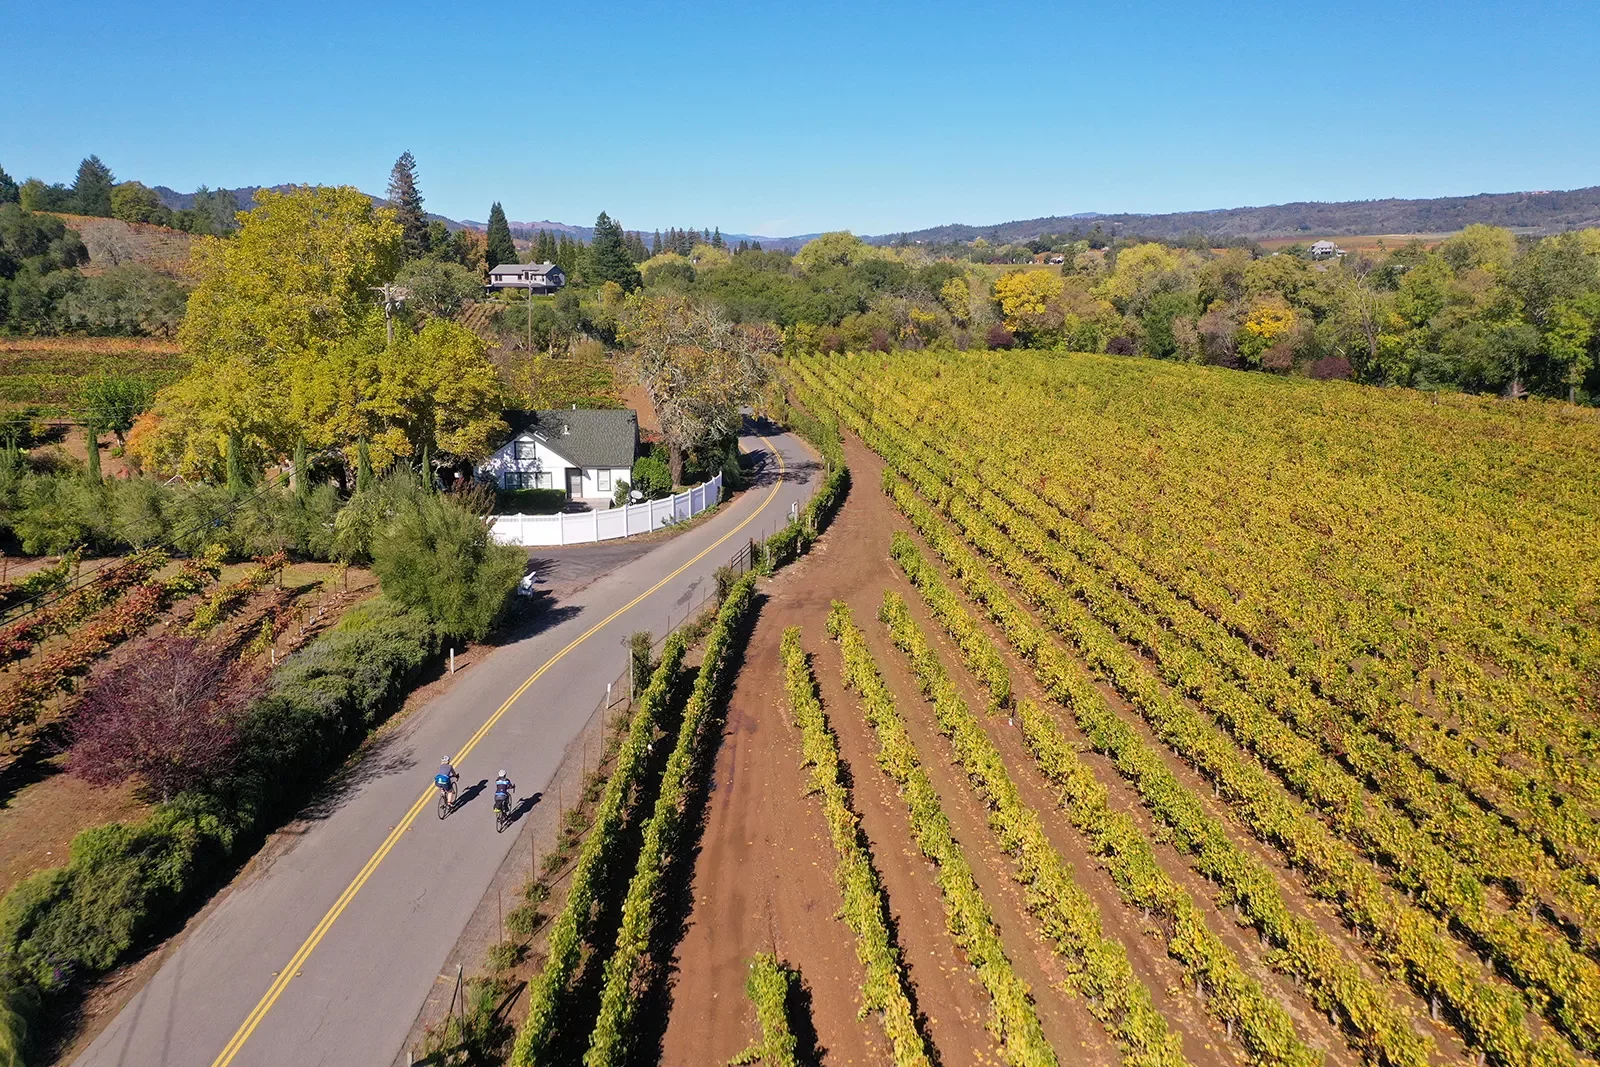 Two guests cycling down vineyard road.